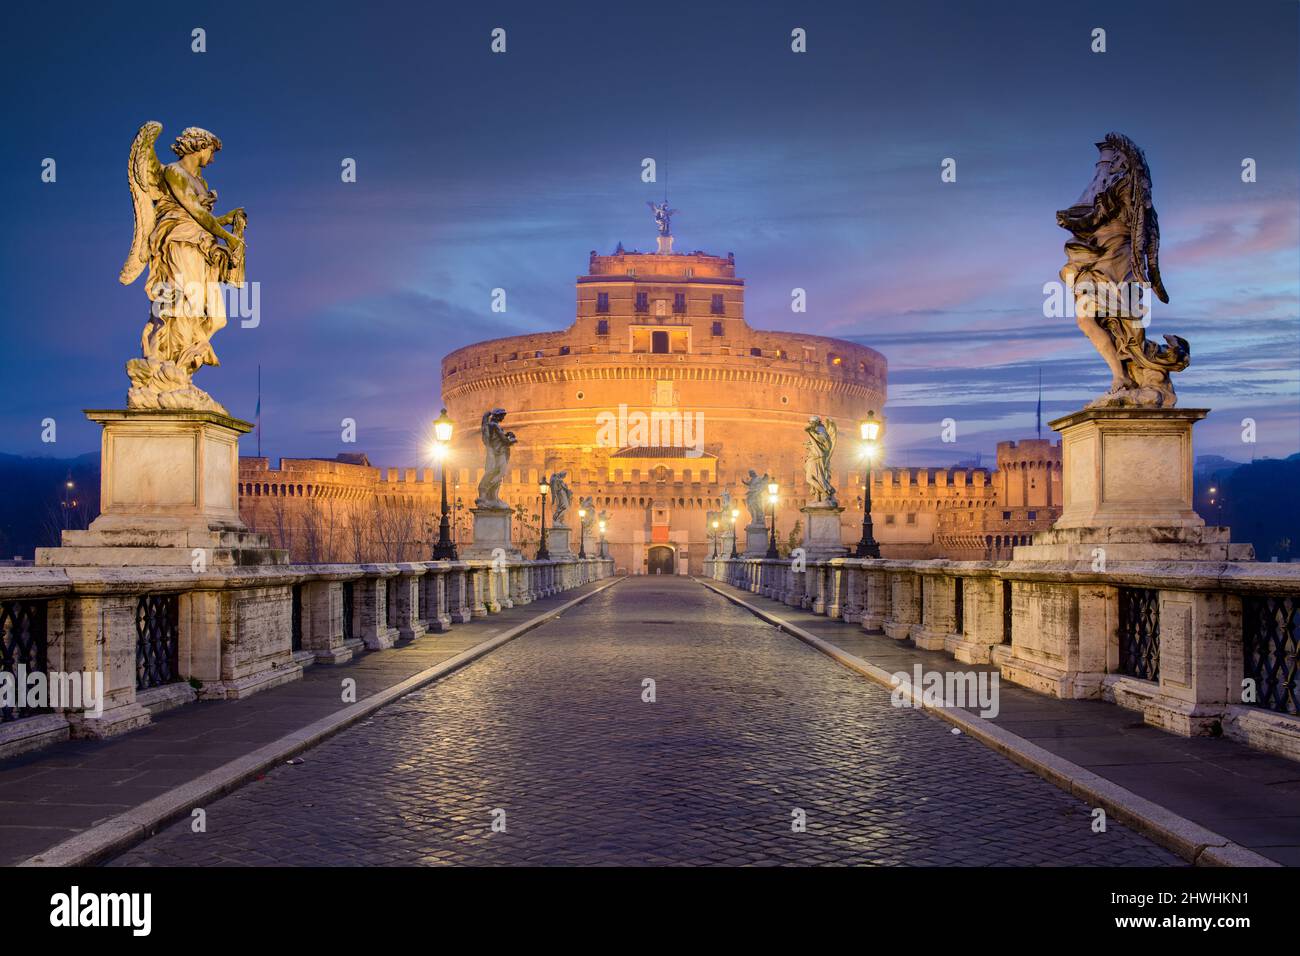 Rome, Italy at Castel Sant'Angelo during twilight. Stock Photo